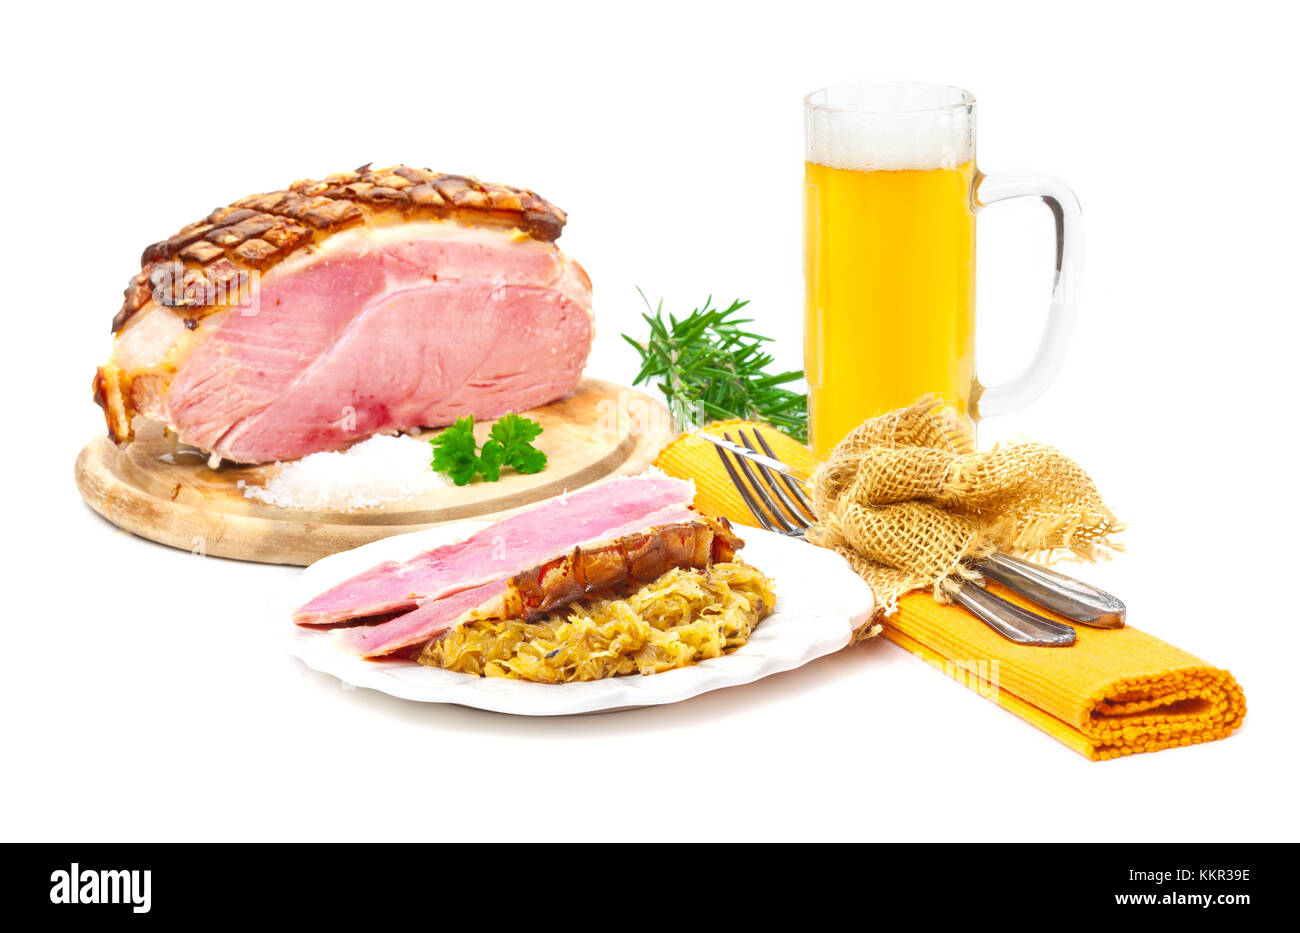 Pork roast with crackling with sauerkraut and beer Stock Photo